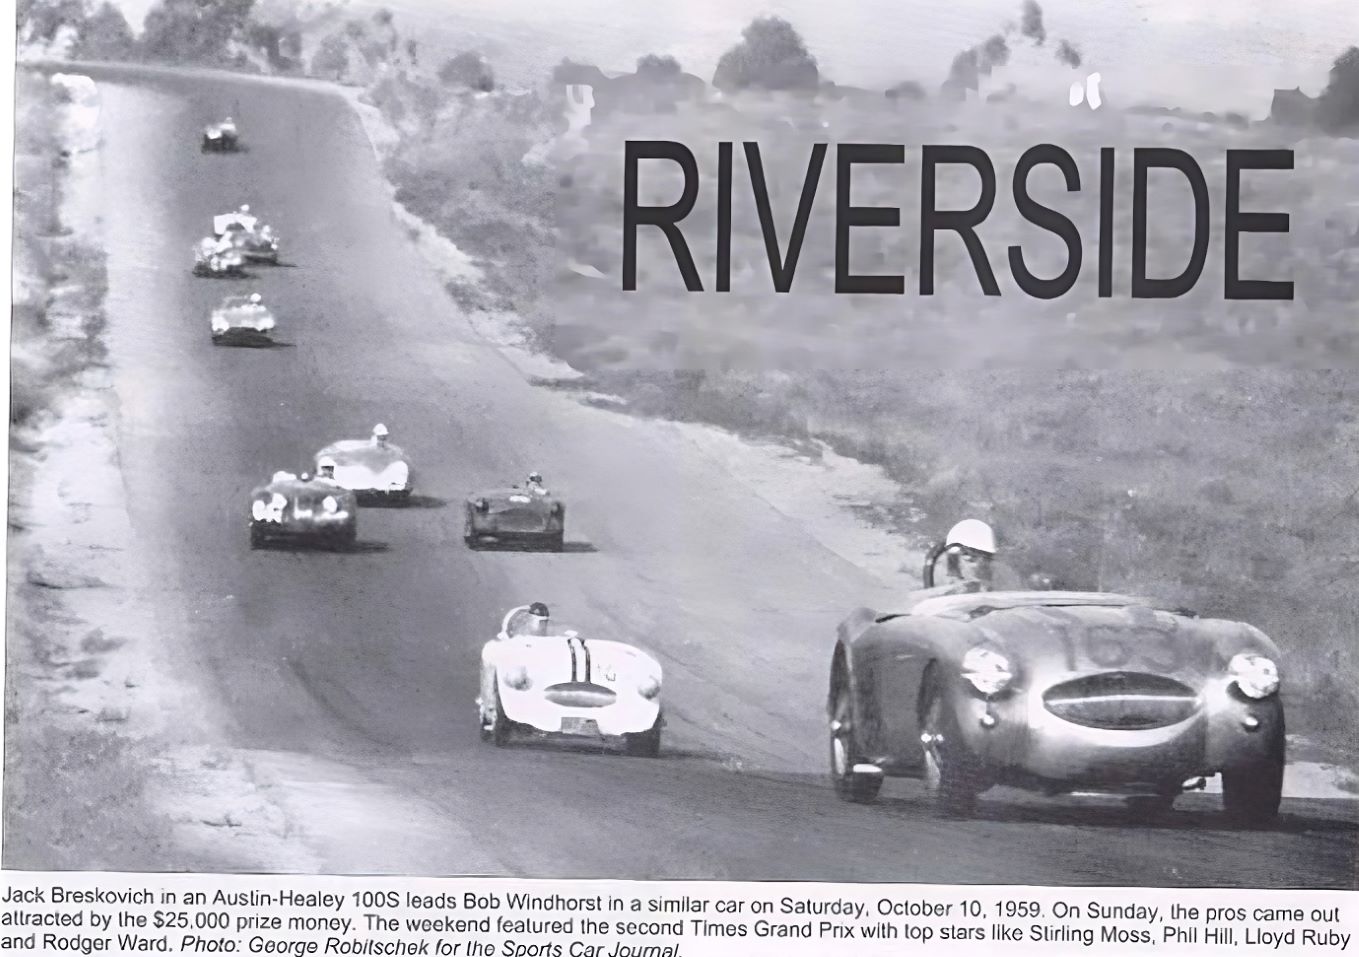 Name:  AH 100S #401 AHS3709 Jack Beskovitch Riverside 3 hour race 1959 #163 w another 100S 174 kb arch .jpg
Views: 191
Size:  173.6 KB